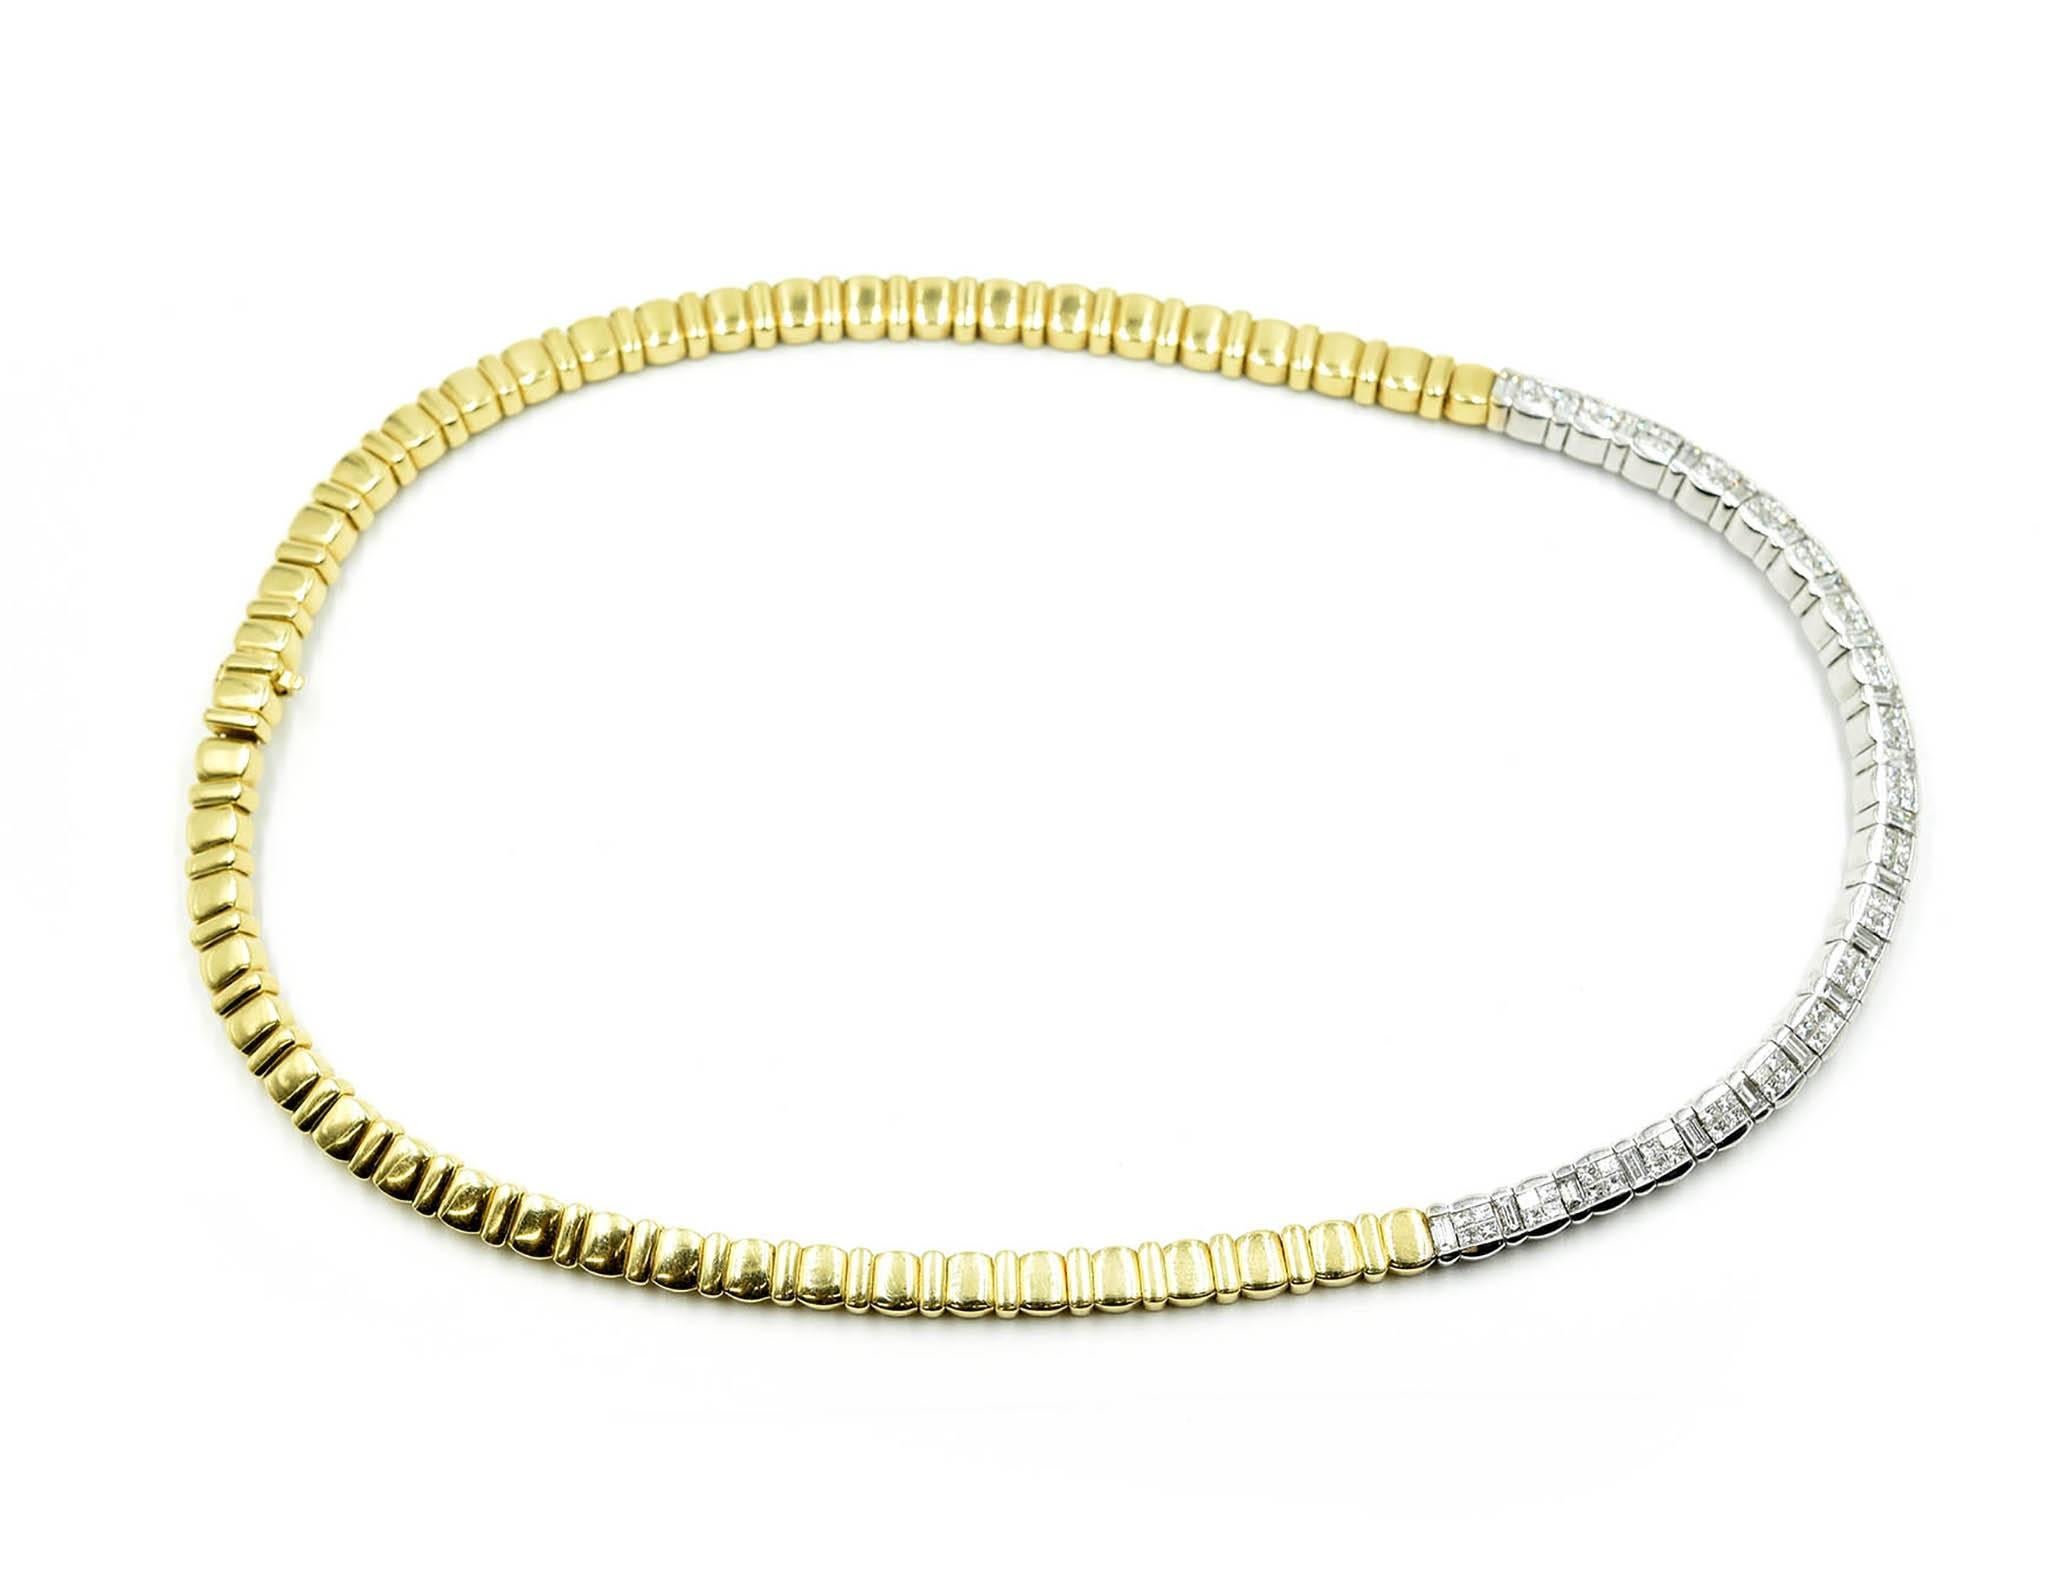 This necklace makes a statement! This necklace consists of 18k white and yellow gold links with diamonds. The necklace has 101 diamonds channel set in the white gold links. The diamonds are cut in princess and baguette shapes. The necklace measures